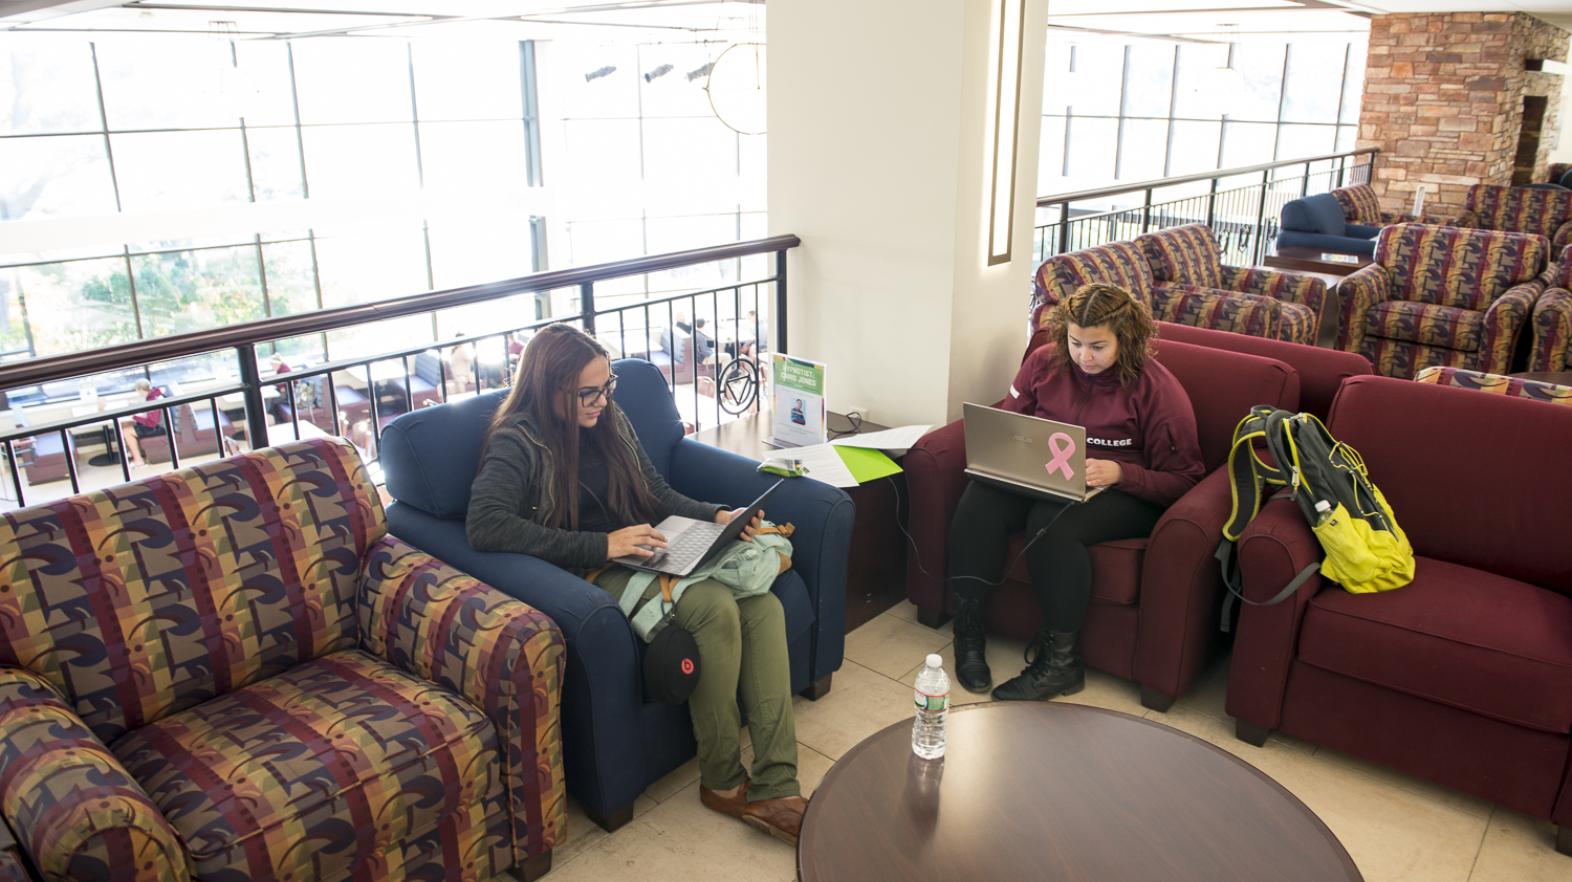 Students studying in campus union